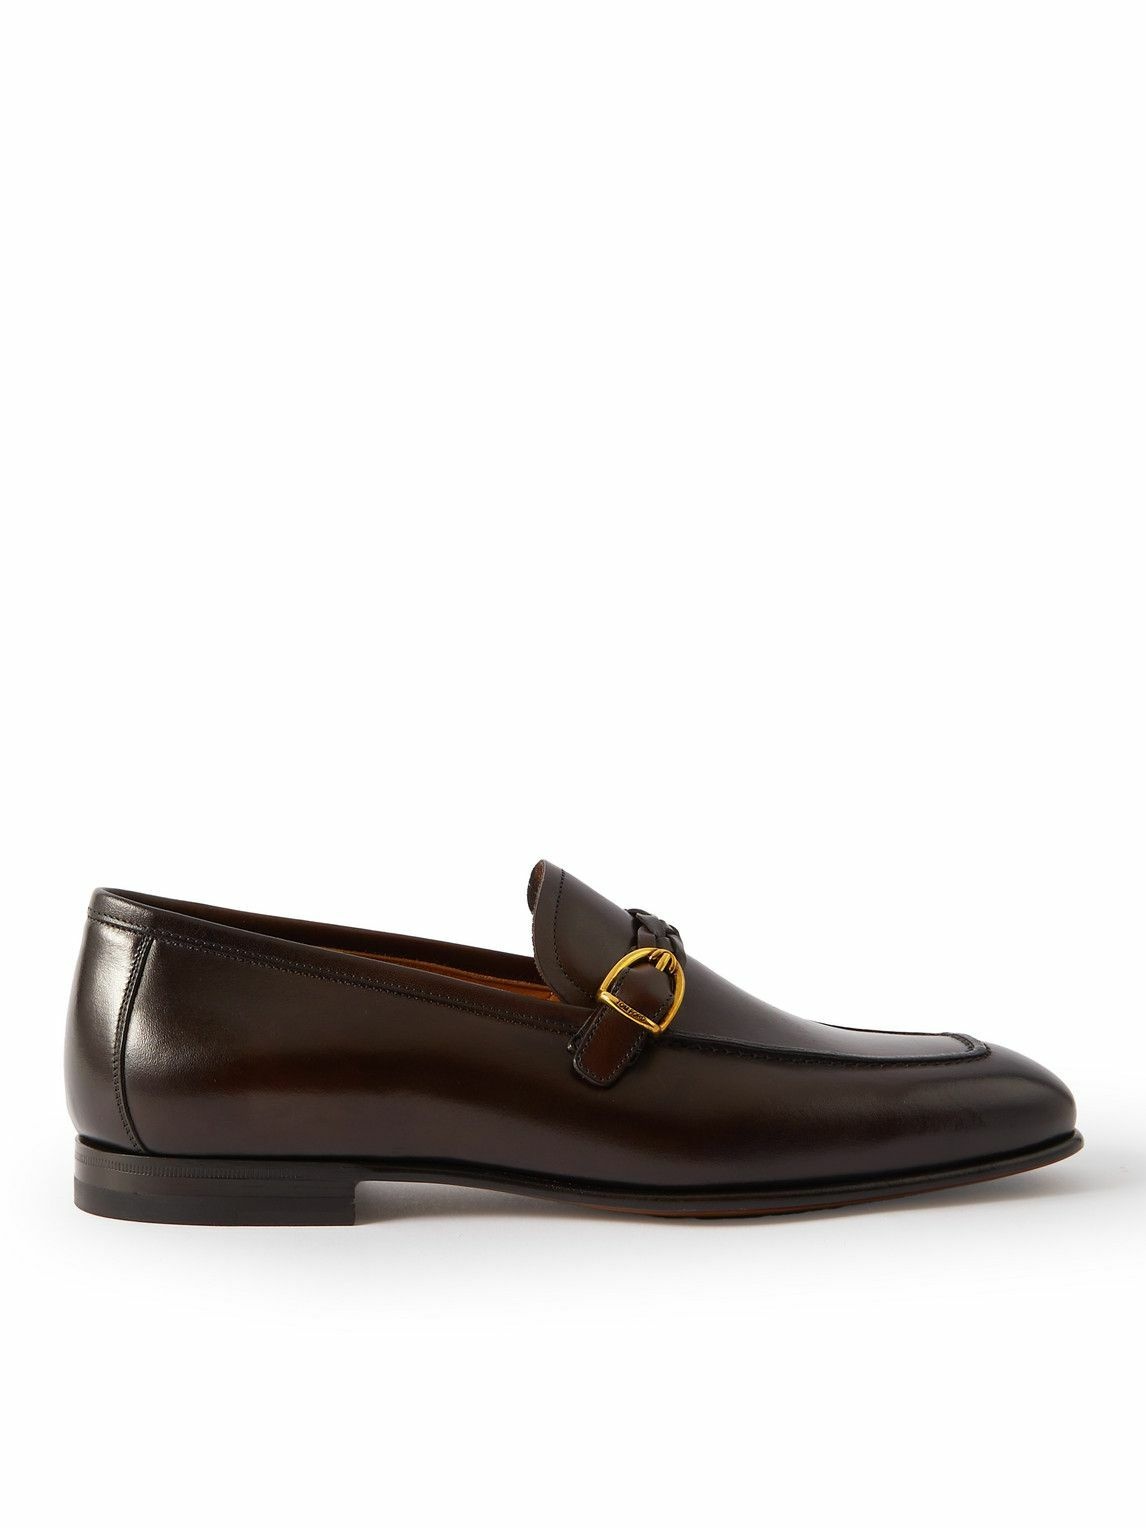 TOM FORD - Martin Burnished-Leather Loafers - Brown TOM FORD